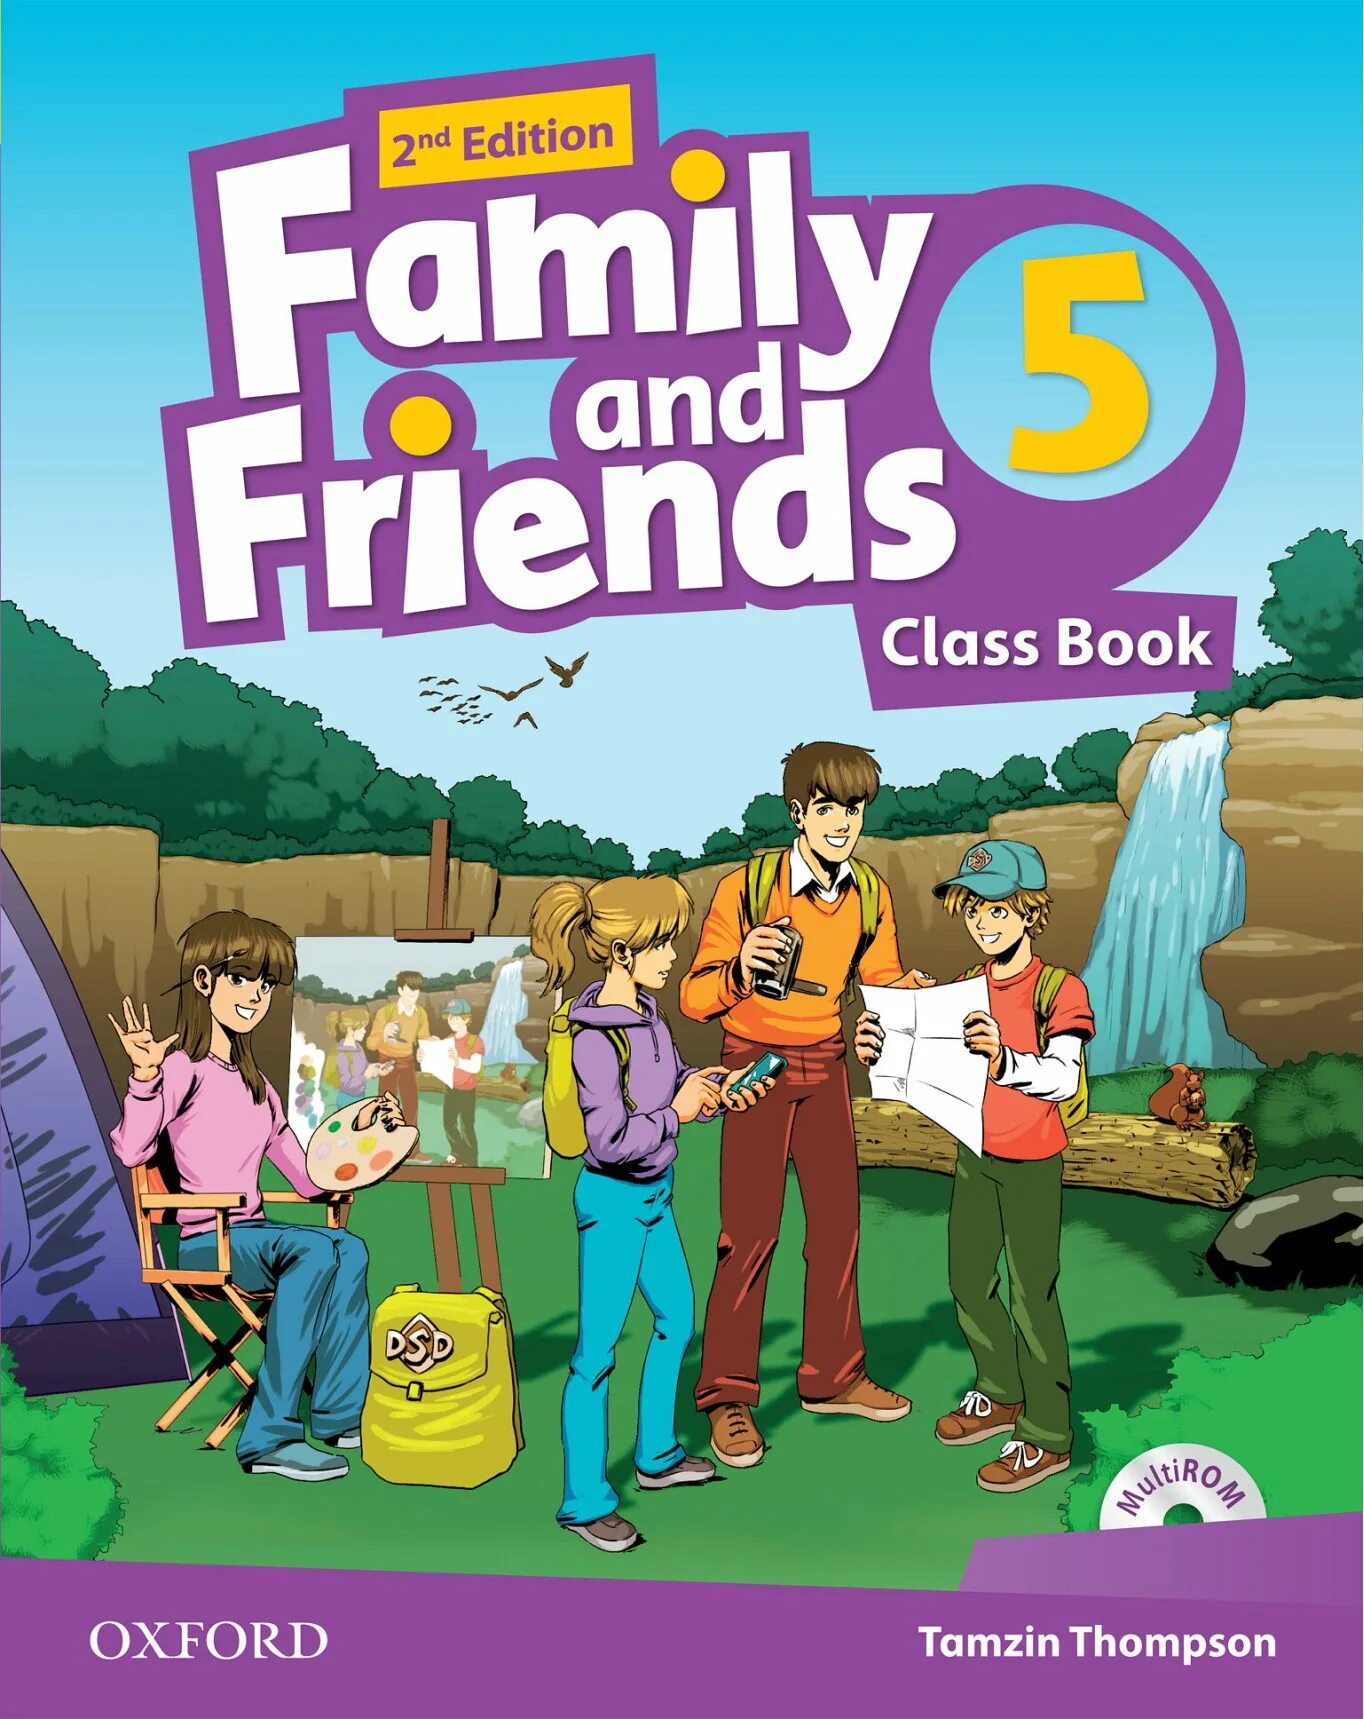 Student book пятый класс. Учебник Family and friends 5. Фэмили френдс 6. \Фэмили энд френдс 2 издание. Family and friends 3 2nd Edition.